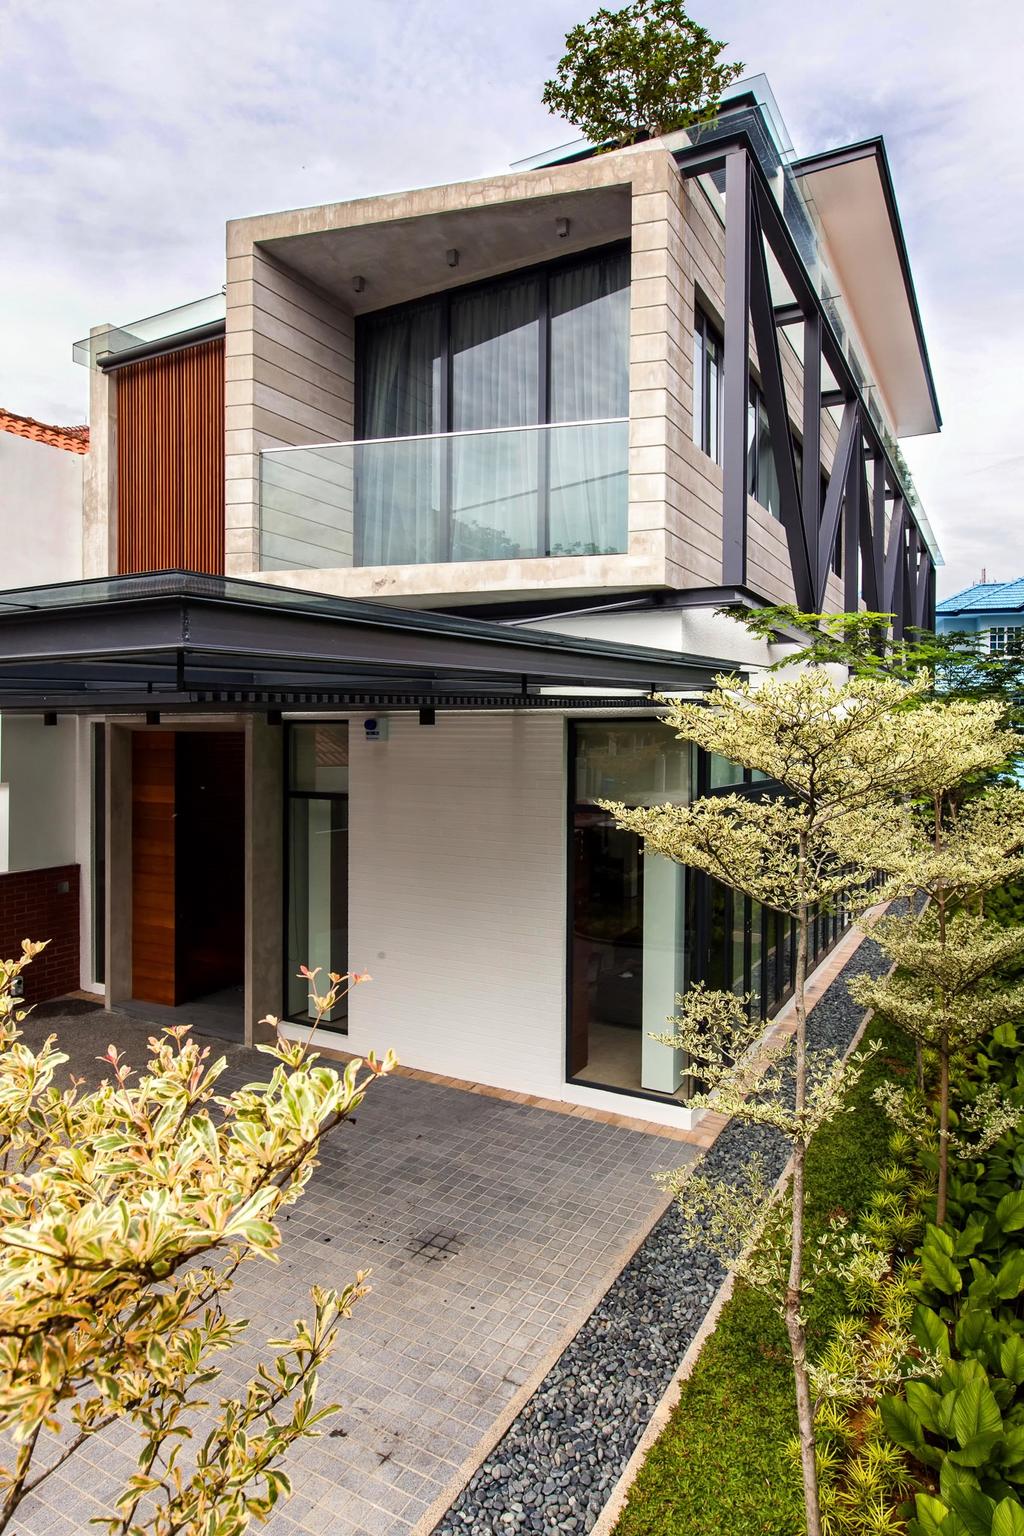 Contemporary, Landed, Jalan Remis, Architect, Aamer Architects, Shelter, Glass Barricade, Square Balcony, Plants, Pebble Trail, Porch